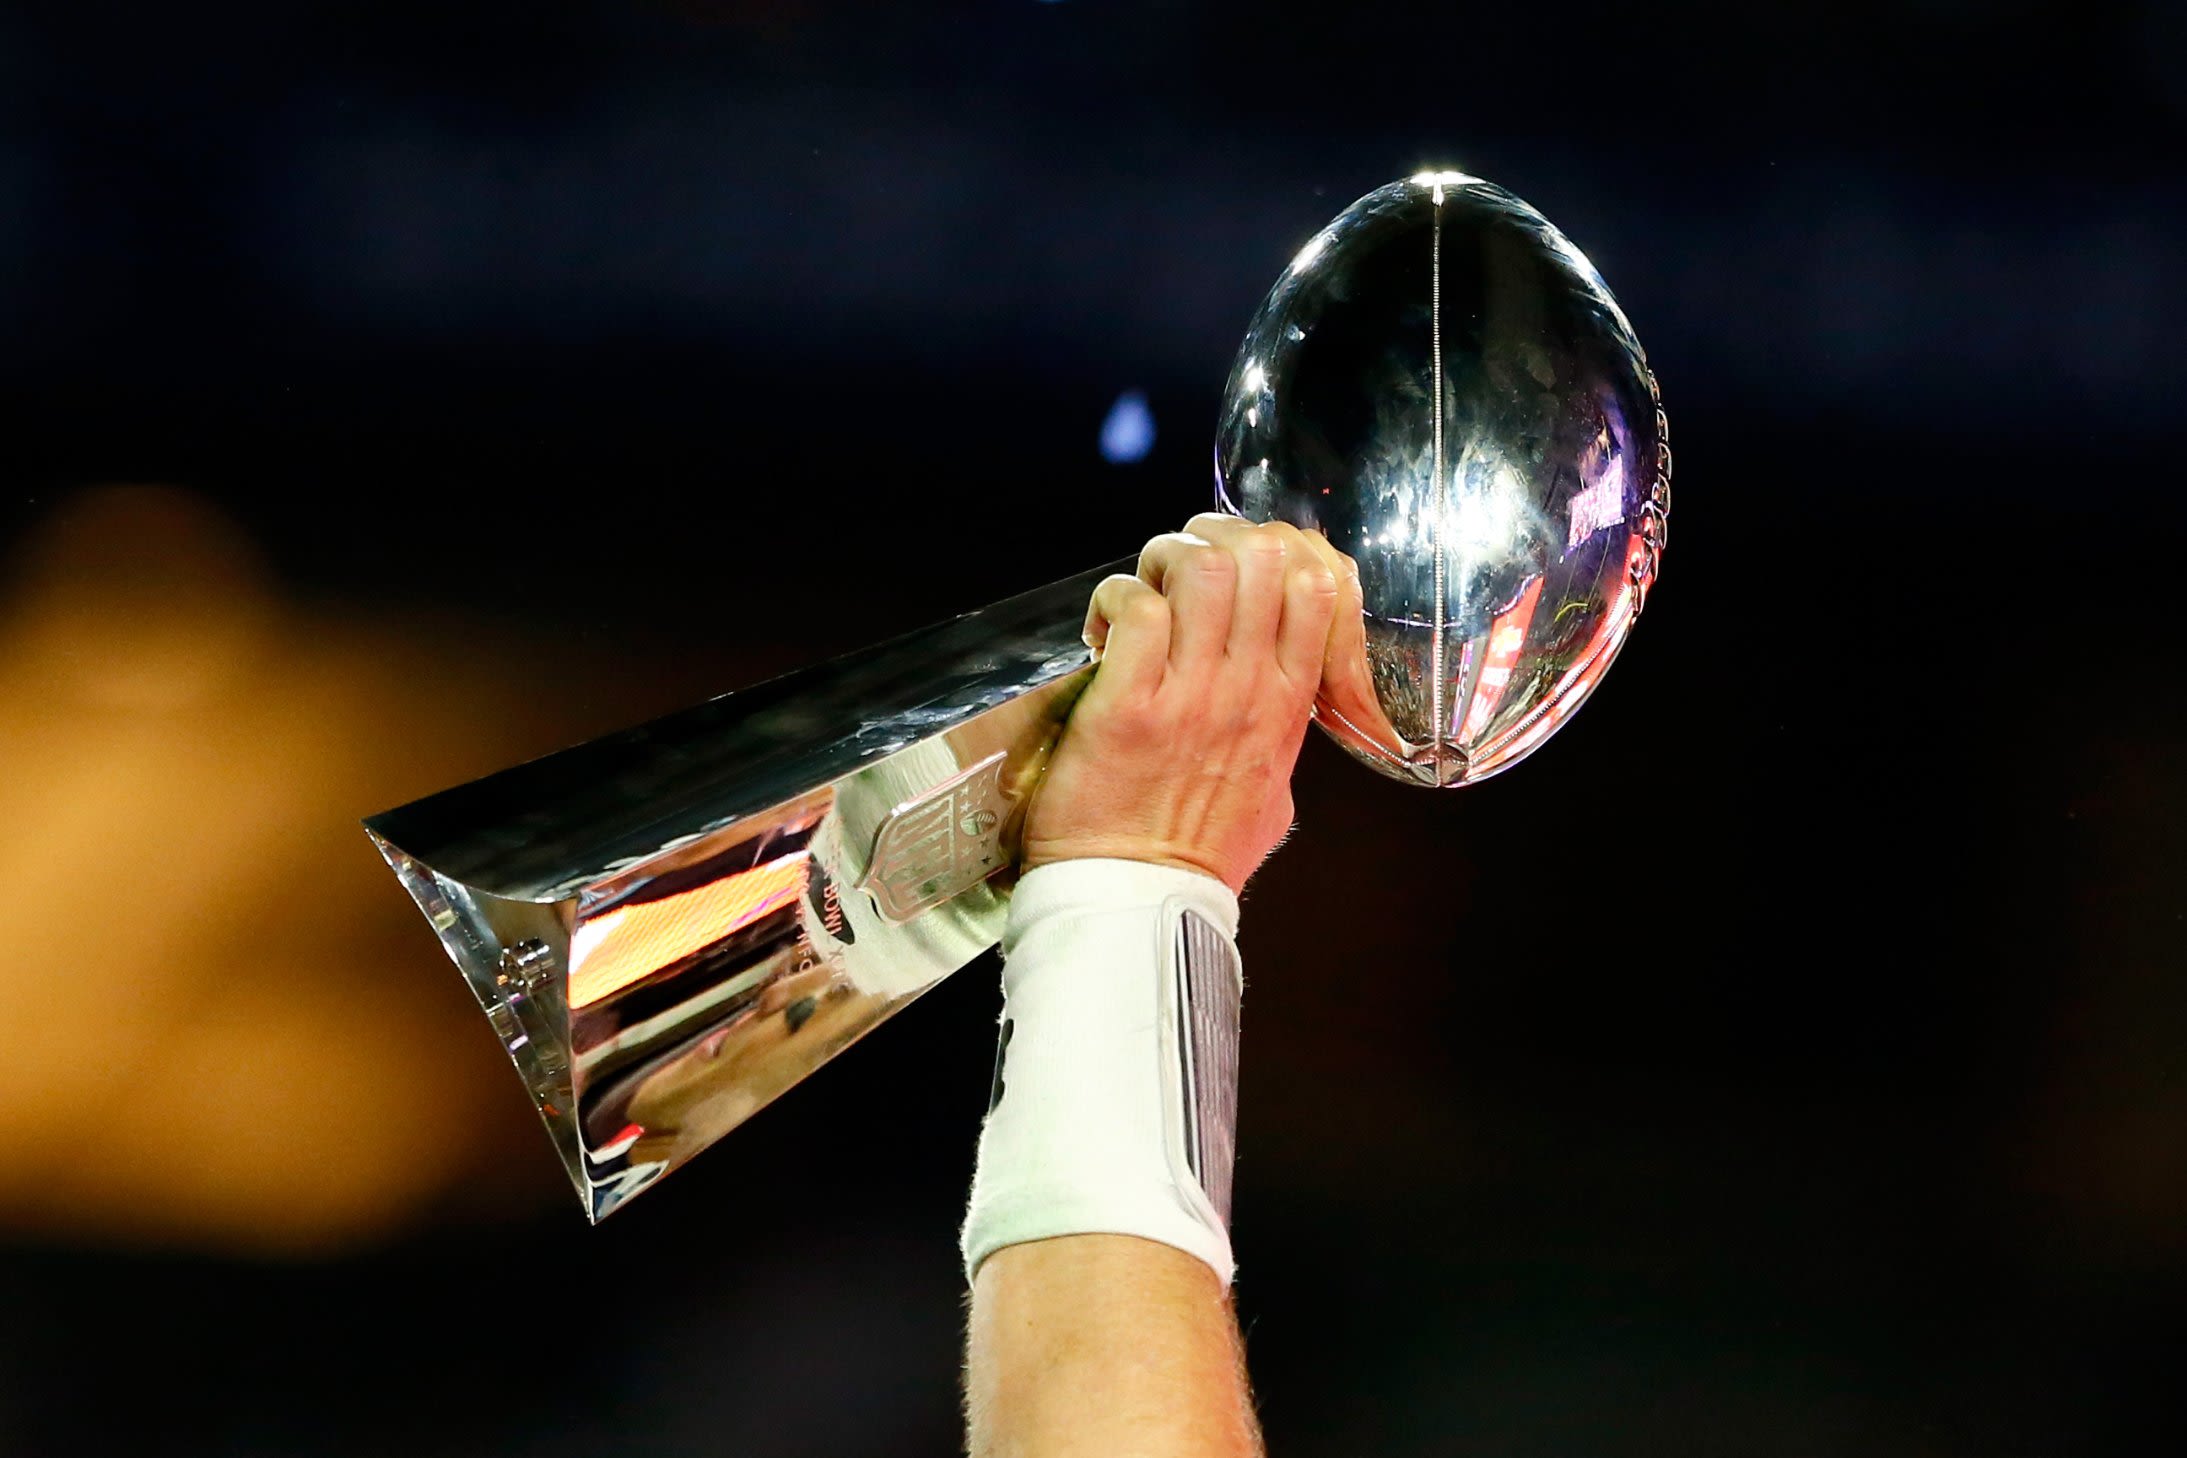 Should the day after the Super Bowl be a national holiday?